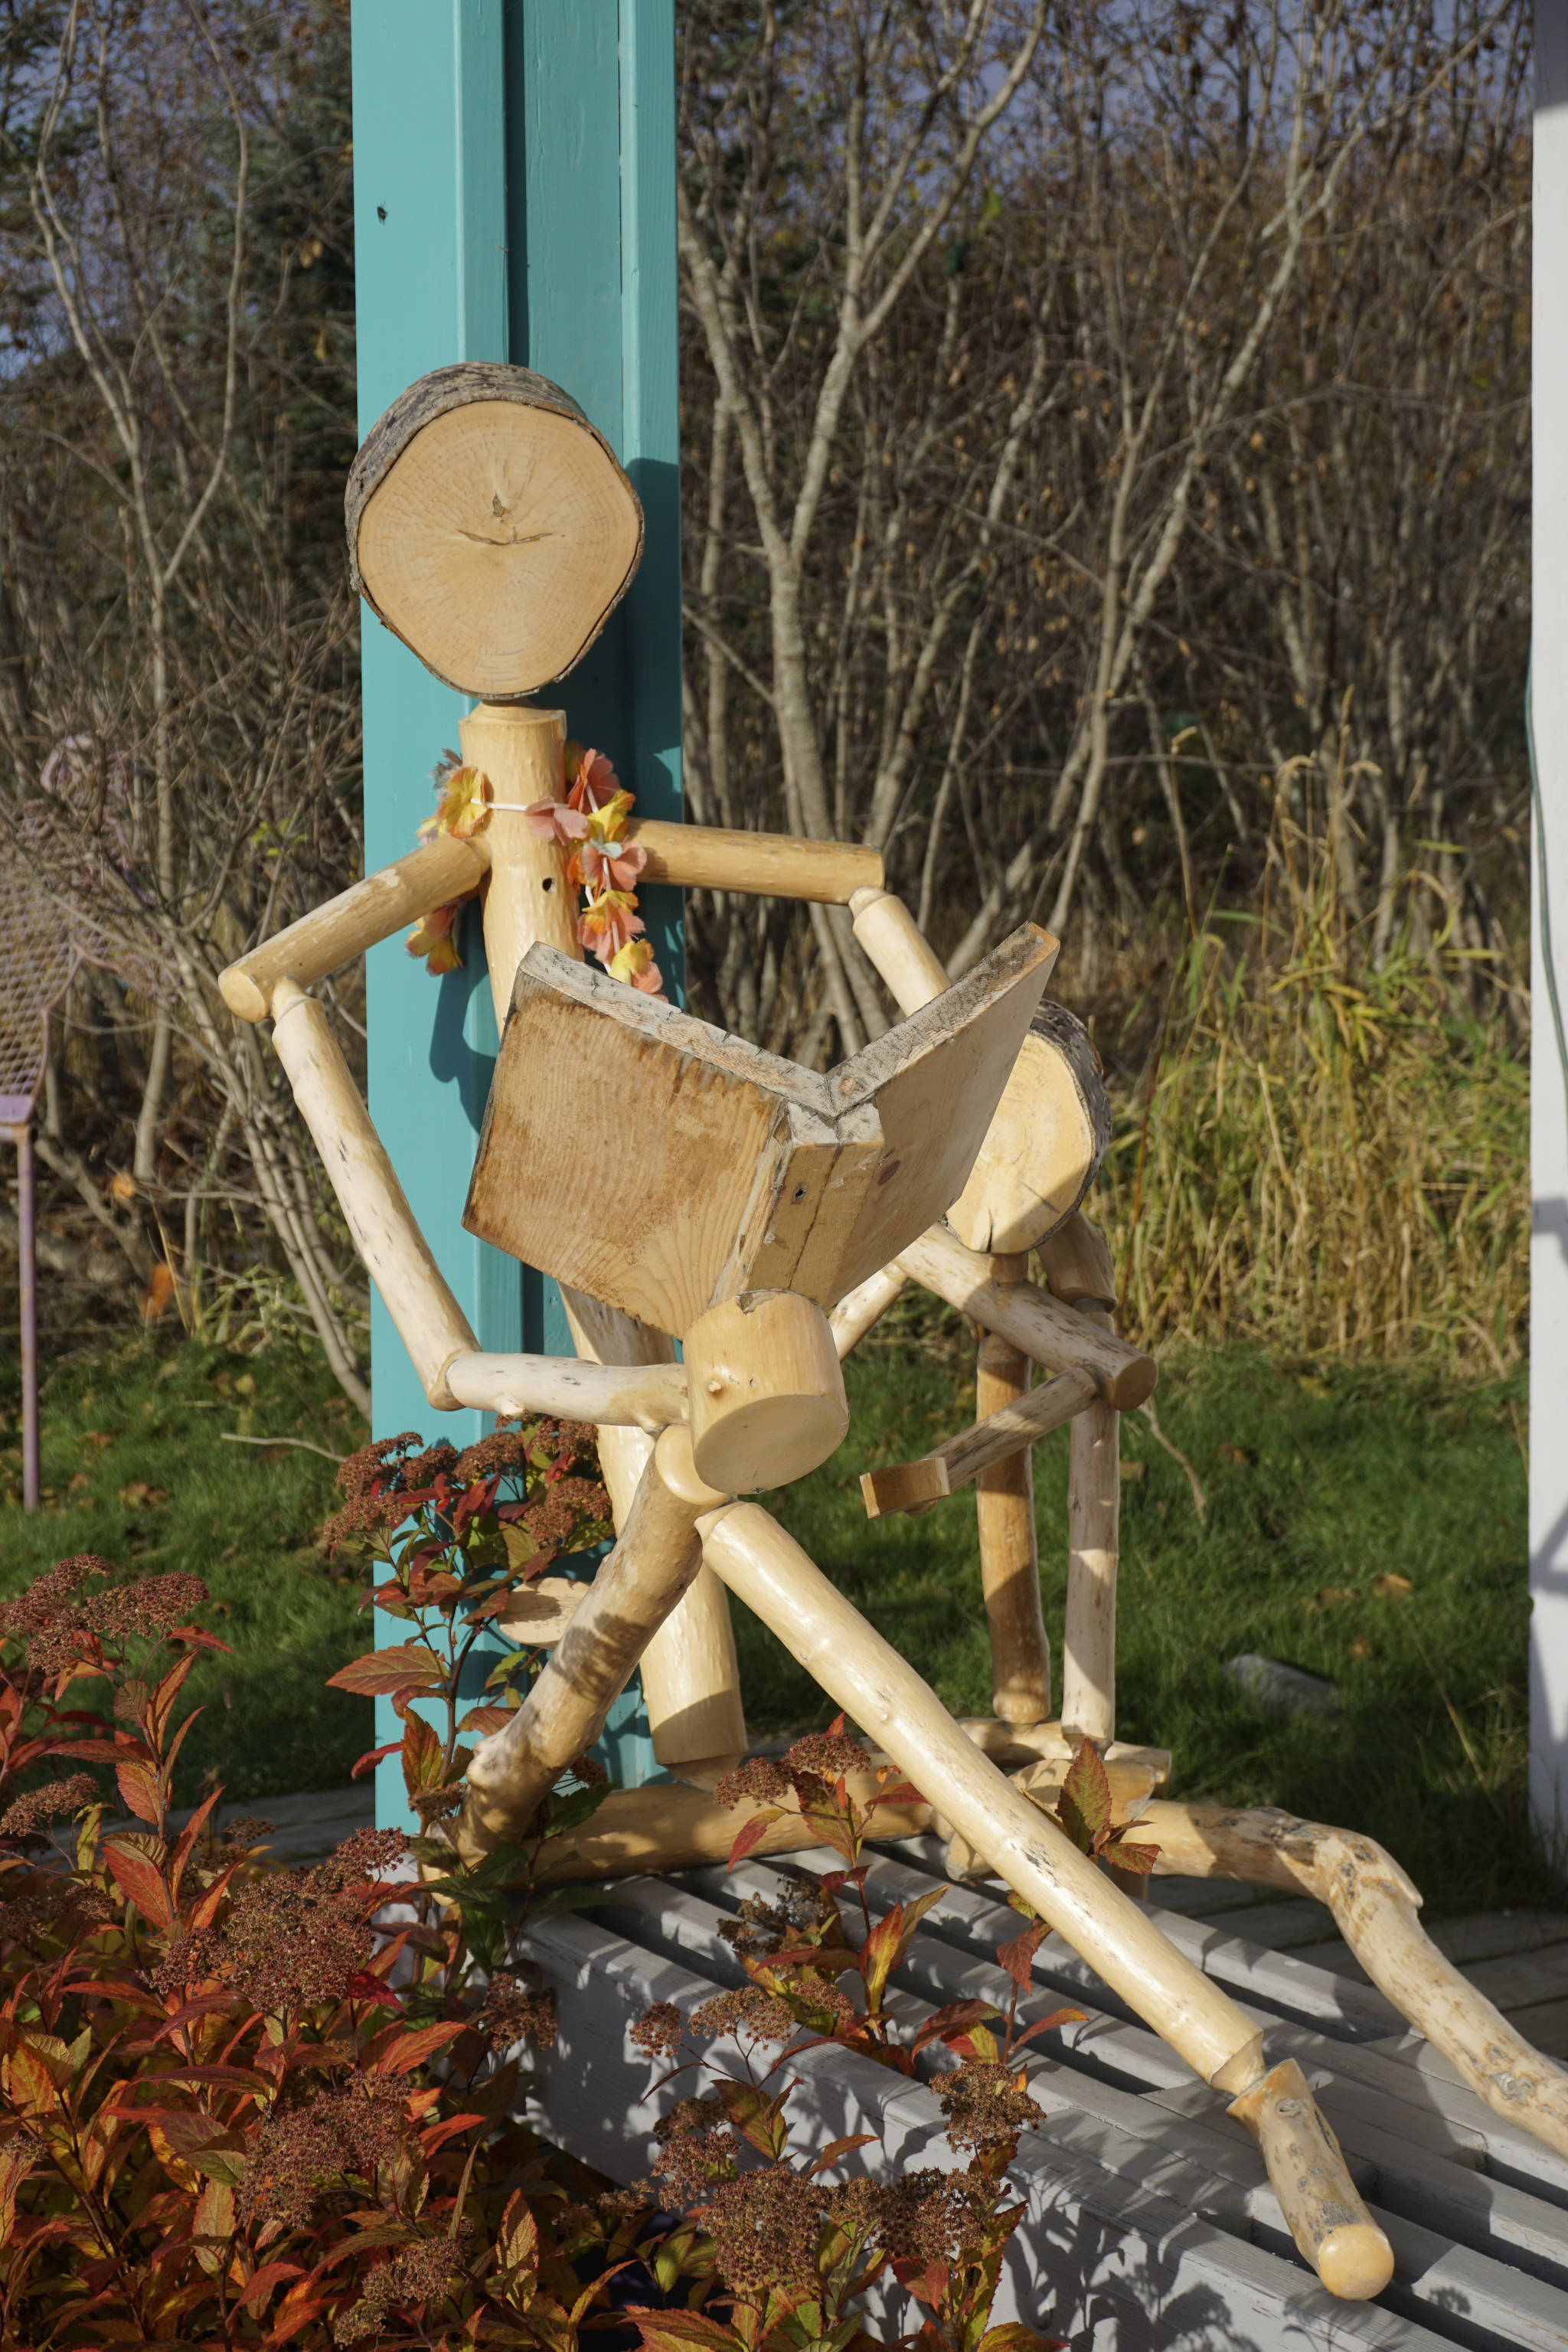 A stick man sculpture sits on the front porch of the Homer Bookstore on Oct. 29, 2018, in Homer, Alaska. (Photo by Michael Armstrong/Homer News)